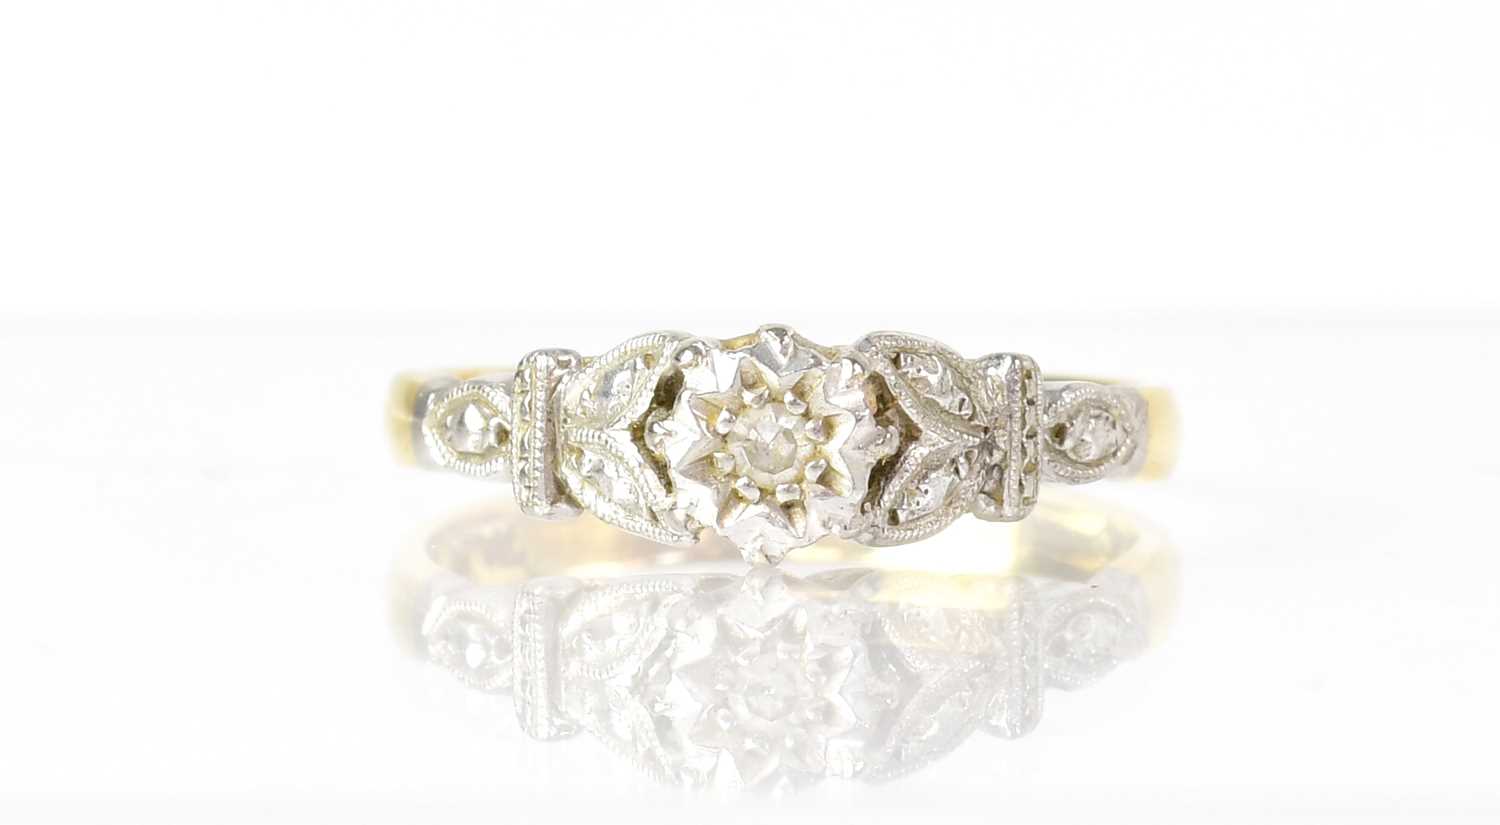 Four 18ct gold rings variously set with diamonds, chip diamonds, white stones and a tiny blue stone,